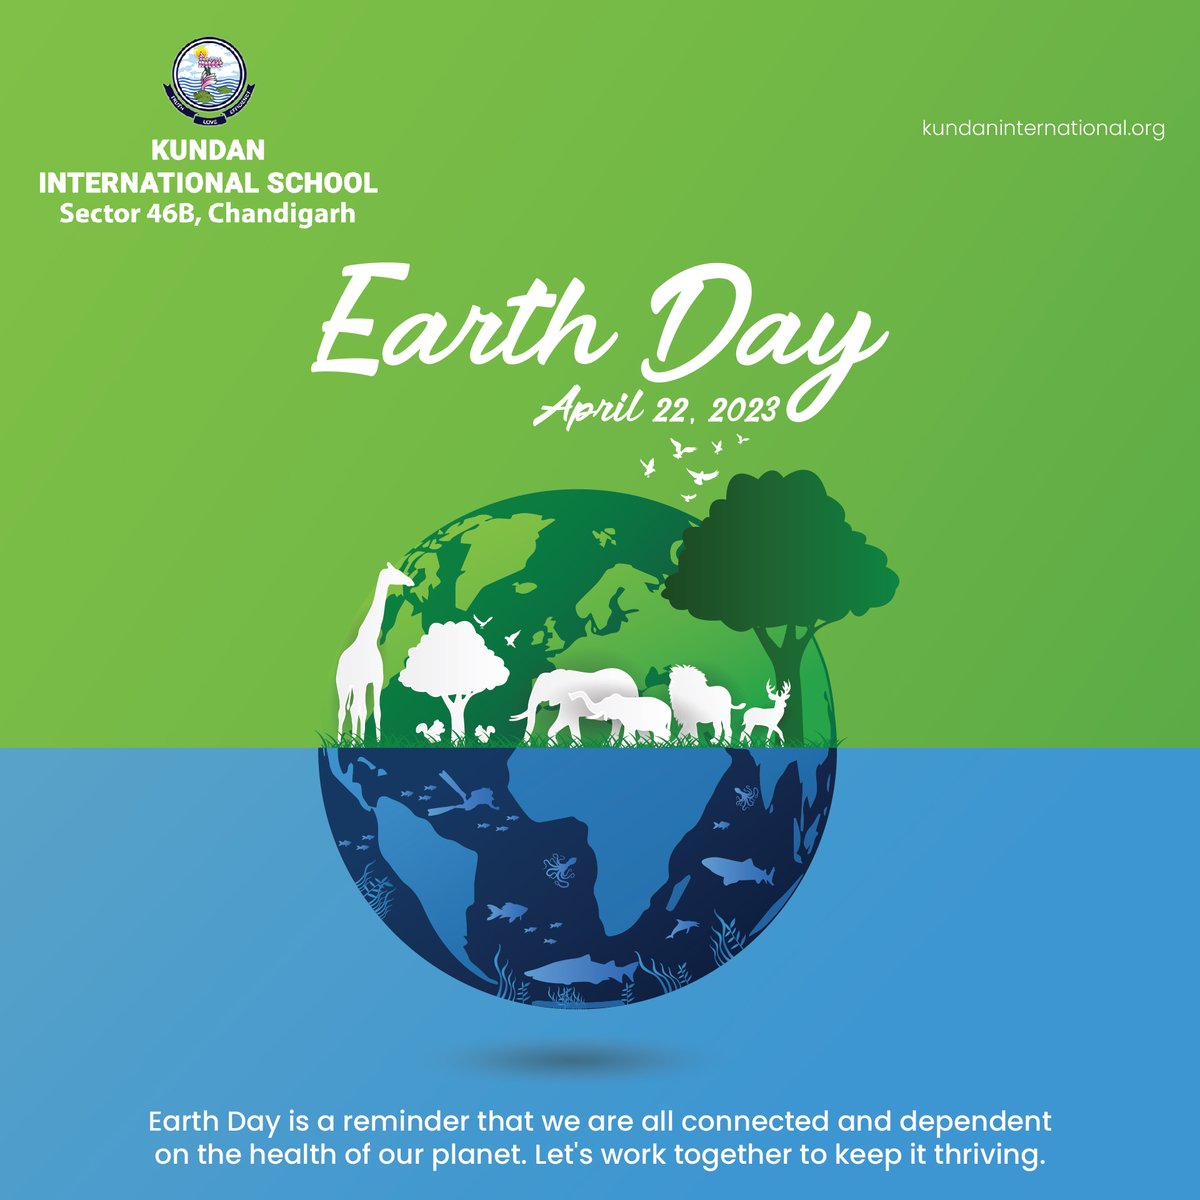 On this Earth Day🌍let's remember that every small action counts towards creating a better future for our planet. Let's do our part to make a difference🌱💚
 
#OneEarthOneFuture #EarthDay #NatureIsMagic #KundanInternationalSchool #SchoolInChandigarh #Chandigarh #Education